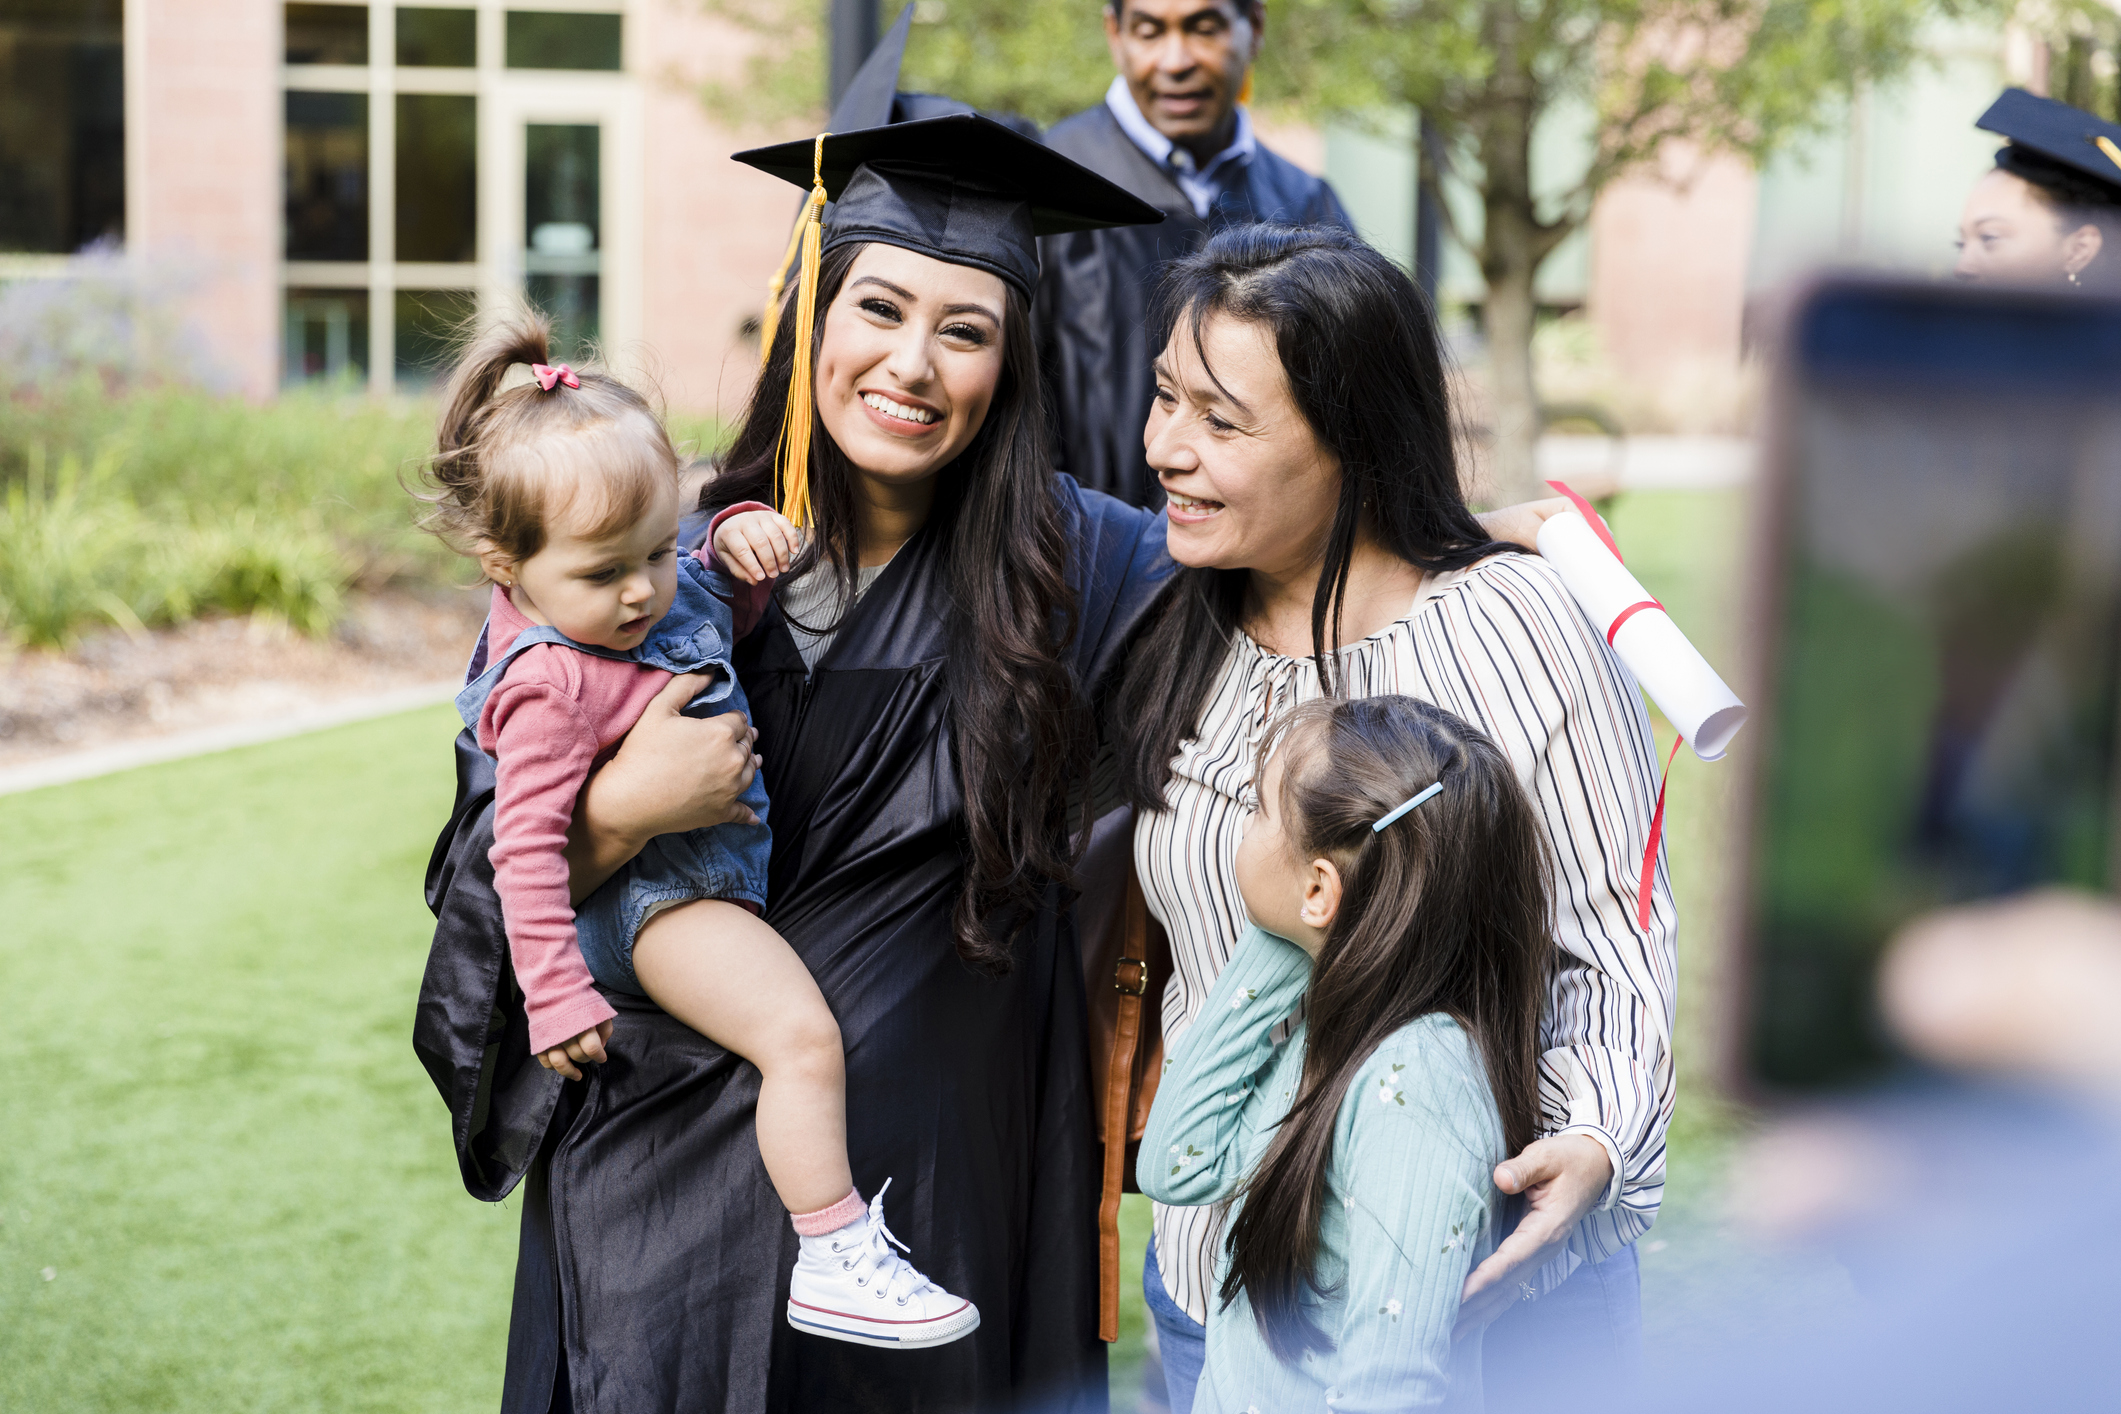 USC’s Pullias Center to Focus on Support Systems for Student Parents with New Grant from Leonetti/O’Connell Family Foundation